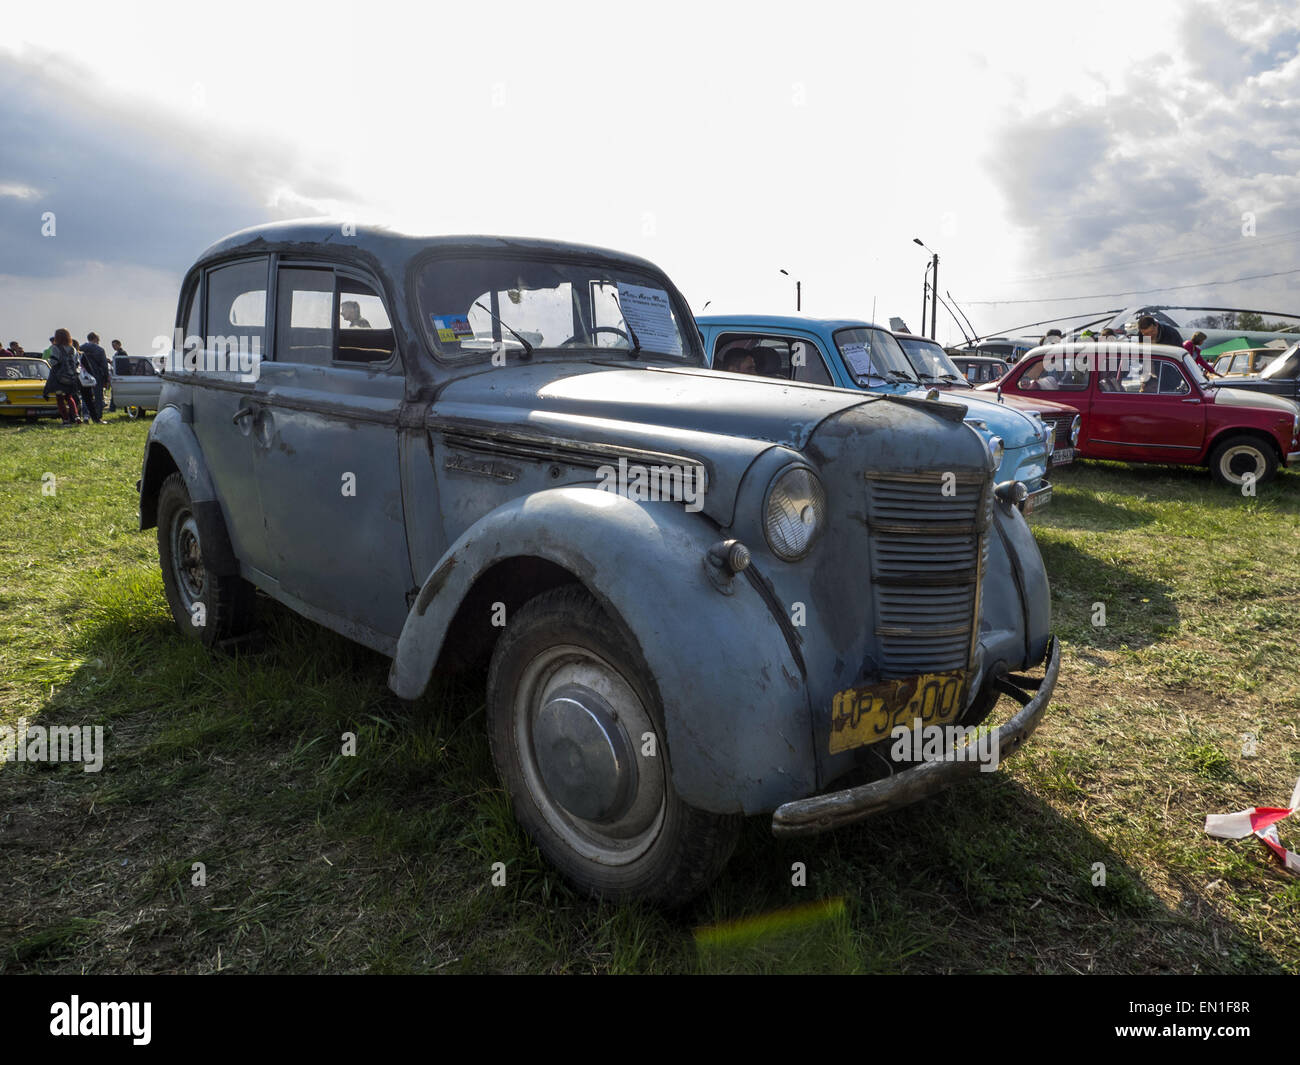 April 25, 2015 - Moskvitch 401 -- The Retro OldCarFest is the biggest retro cars festival held in Kiev, and covers the State Aviation Museum grounds. More than 300 cars are involved into this project and more than 20 thousand visitors are expected to attend. © Igor Golovniov/ZUMA Wire/Alamy Live News Stock Photo